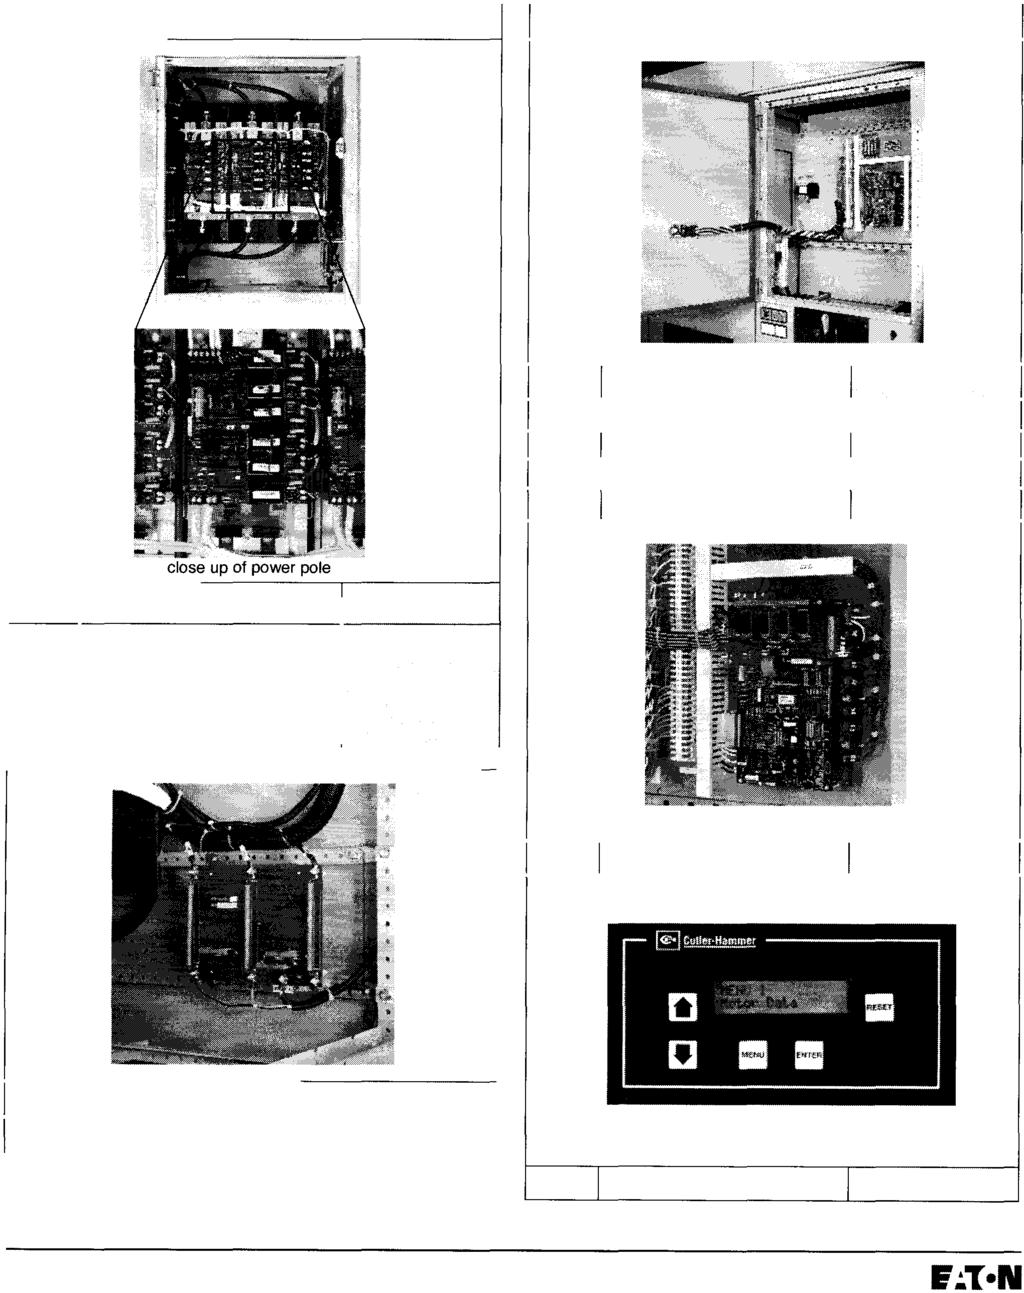 Cutler-Hammer Renewal Parts Effective: March 2000 Page 29 Reduced Voltage Solid State (RVSS) Power pole compartment Main control logic compartment Fig. No. Description 28.2 Transformer 2147A55G10 28.